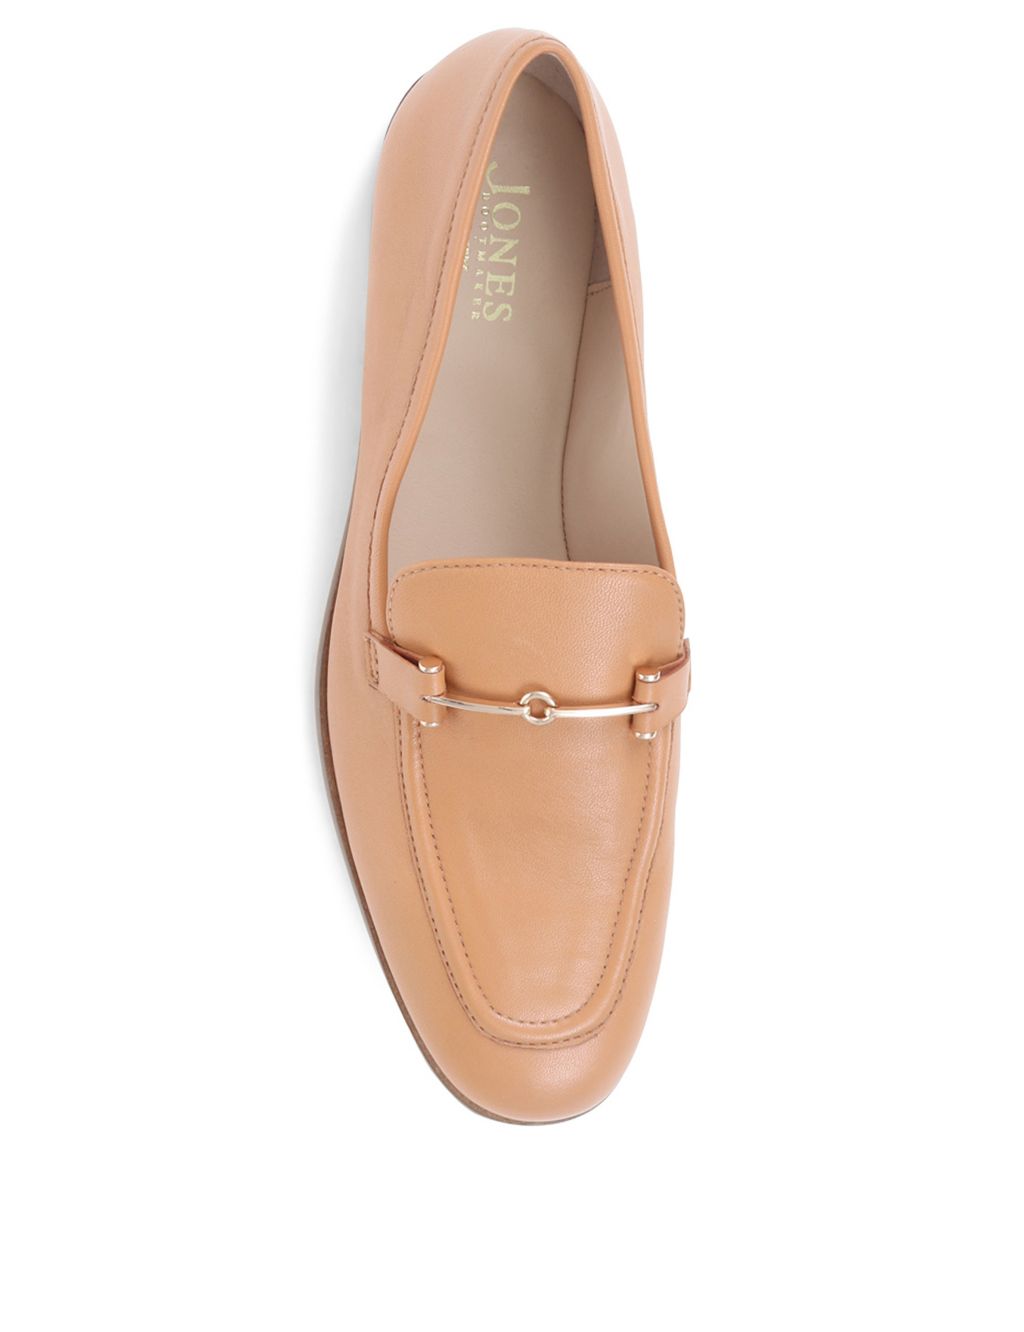 Leather Slip On Bar Flat Loafers image 5